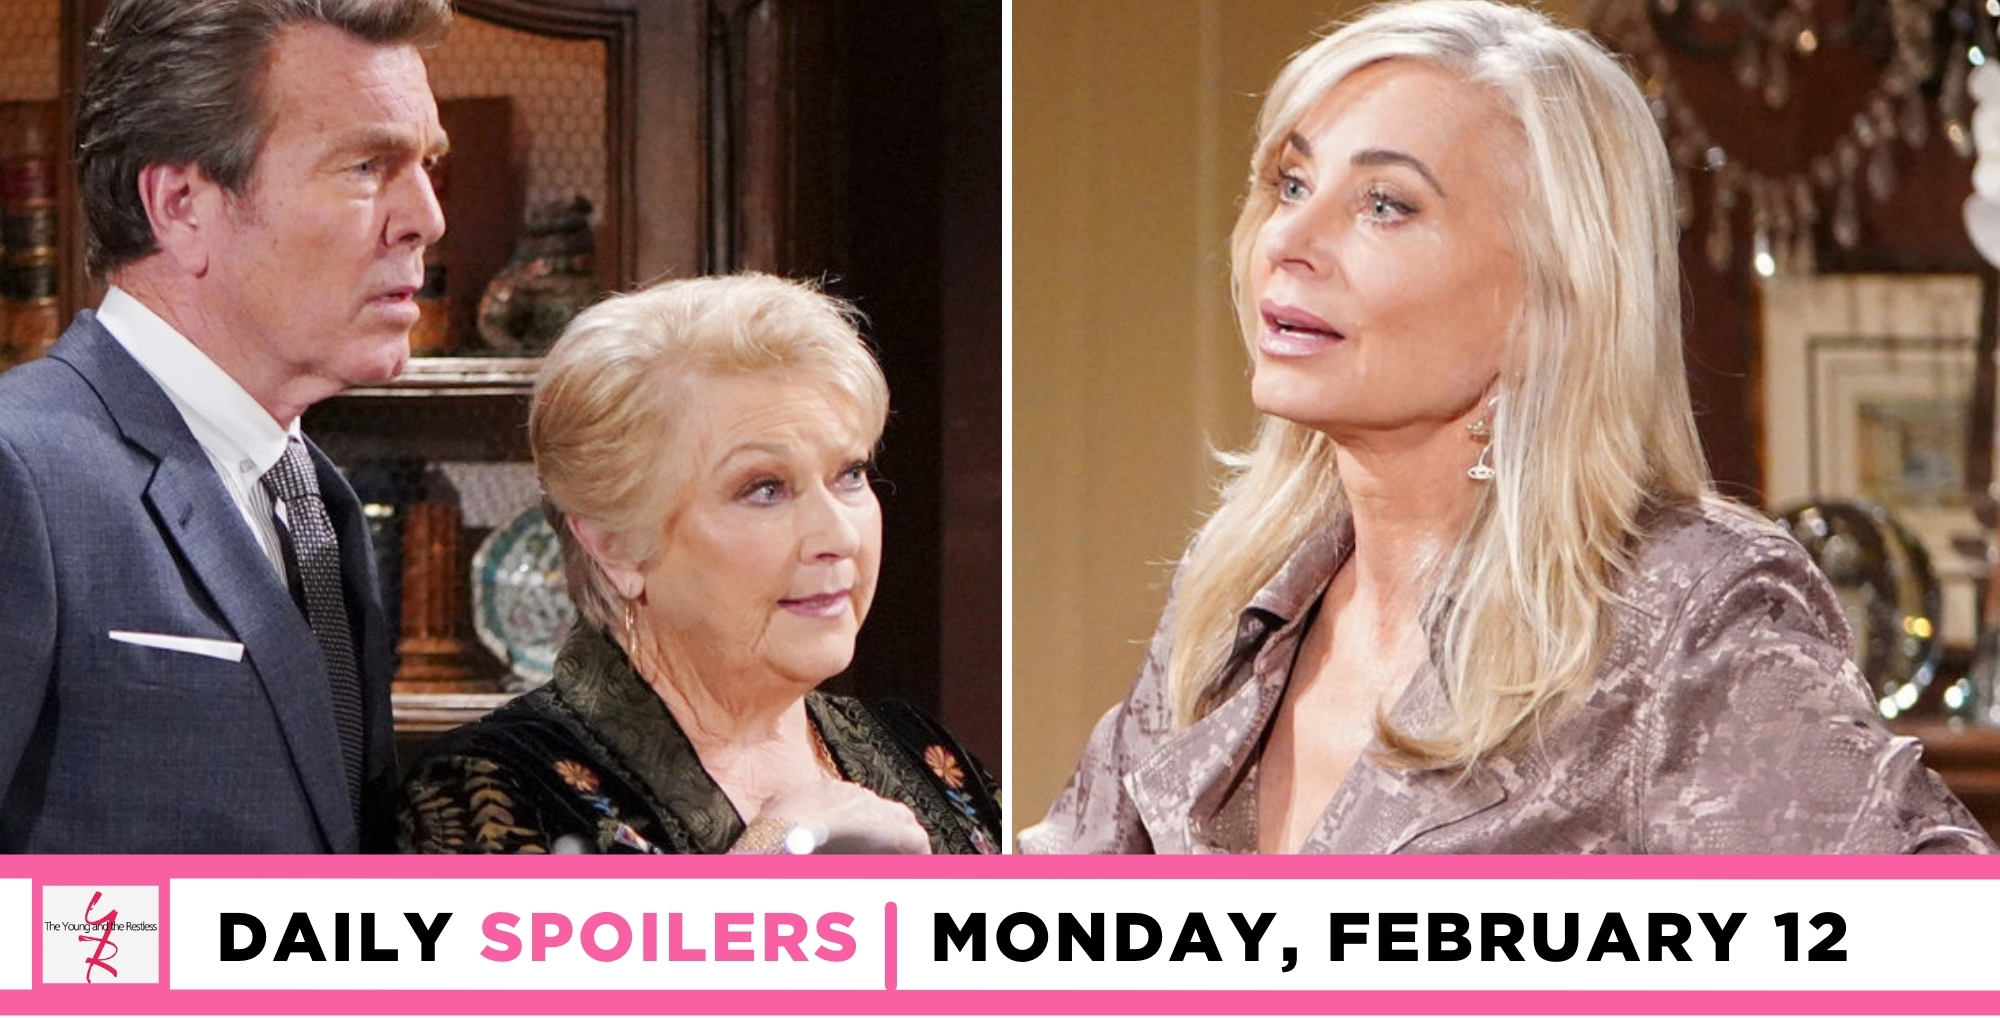 young and the restless spoilers for episode 12805 on monday, february 12, jack and traci and ashley.